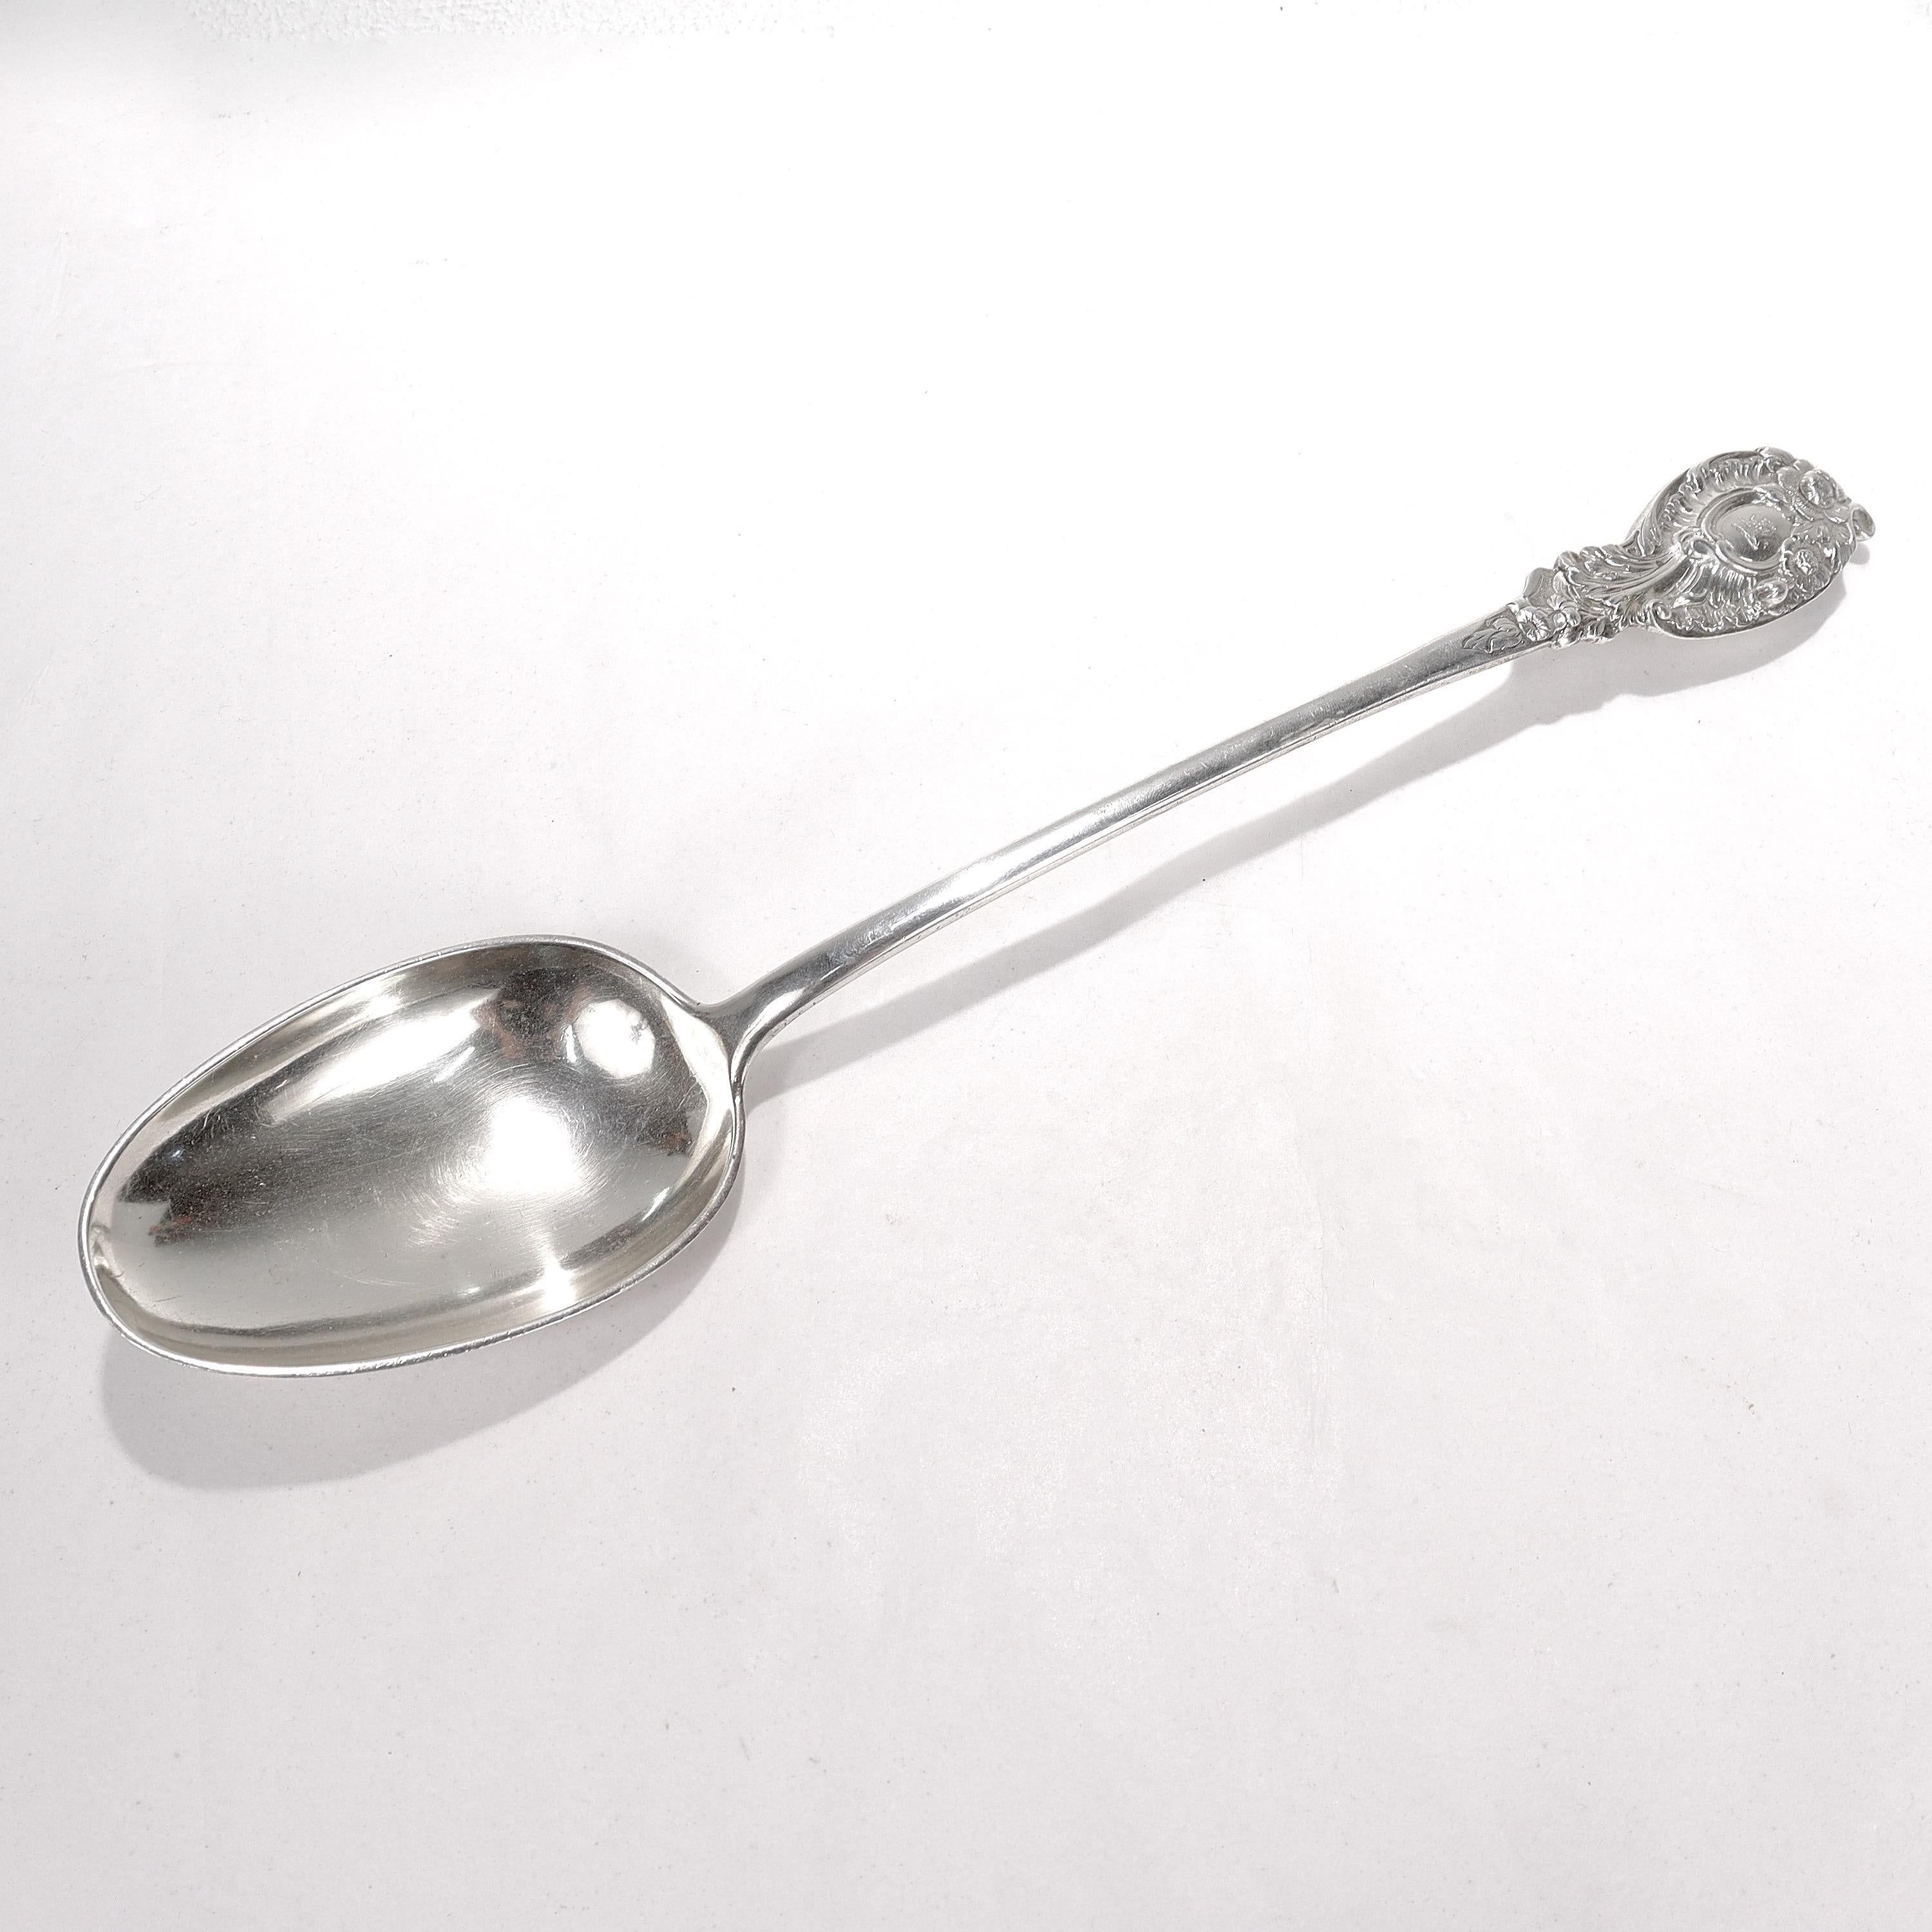 A rare, oversized antique English stuffing spoon.

In sterling silver. 

By Robert Garrard I, London, 1814.

With a rampart lion crest to the handle.

There is a seam to the handle, which we assume is original as this very large spoon was likely